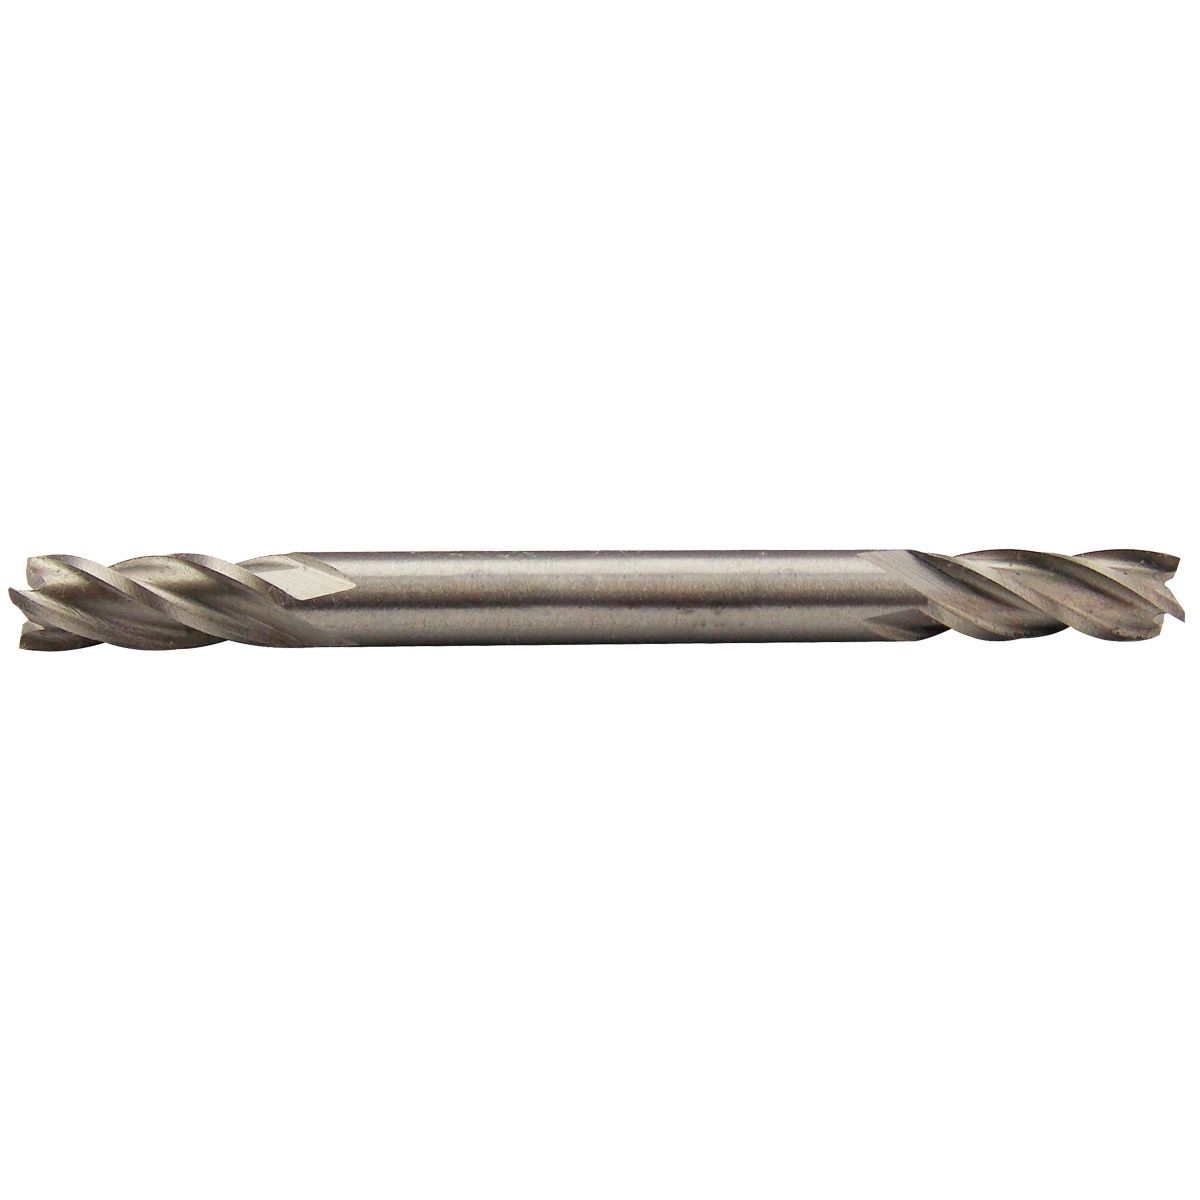 3/32" 4 FLUTE MINI HIGH SPEED STEEL DOUBLE END END MILL (5831-0022)